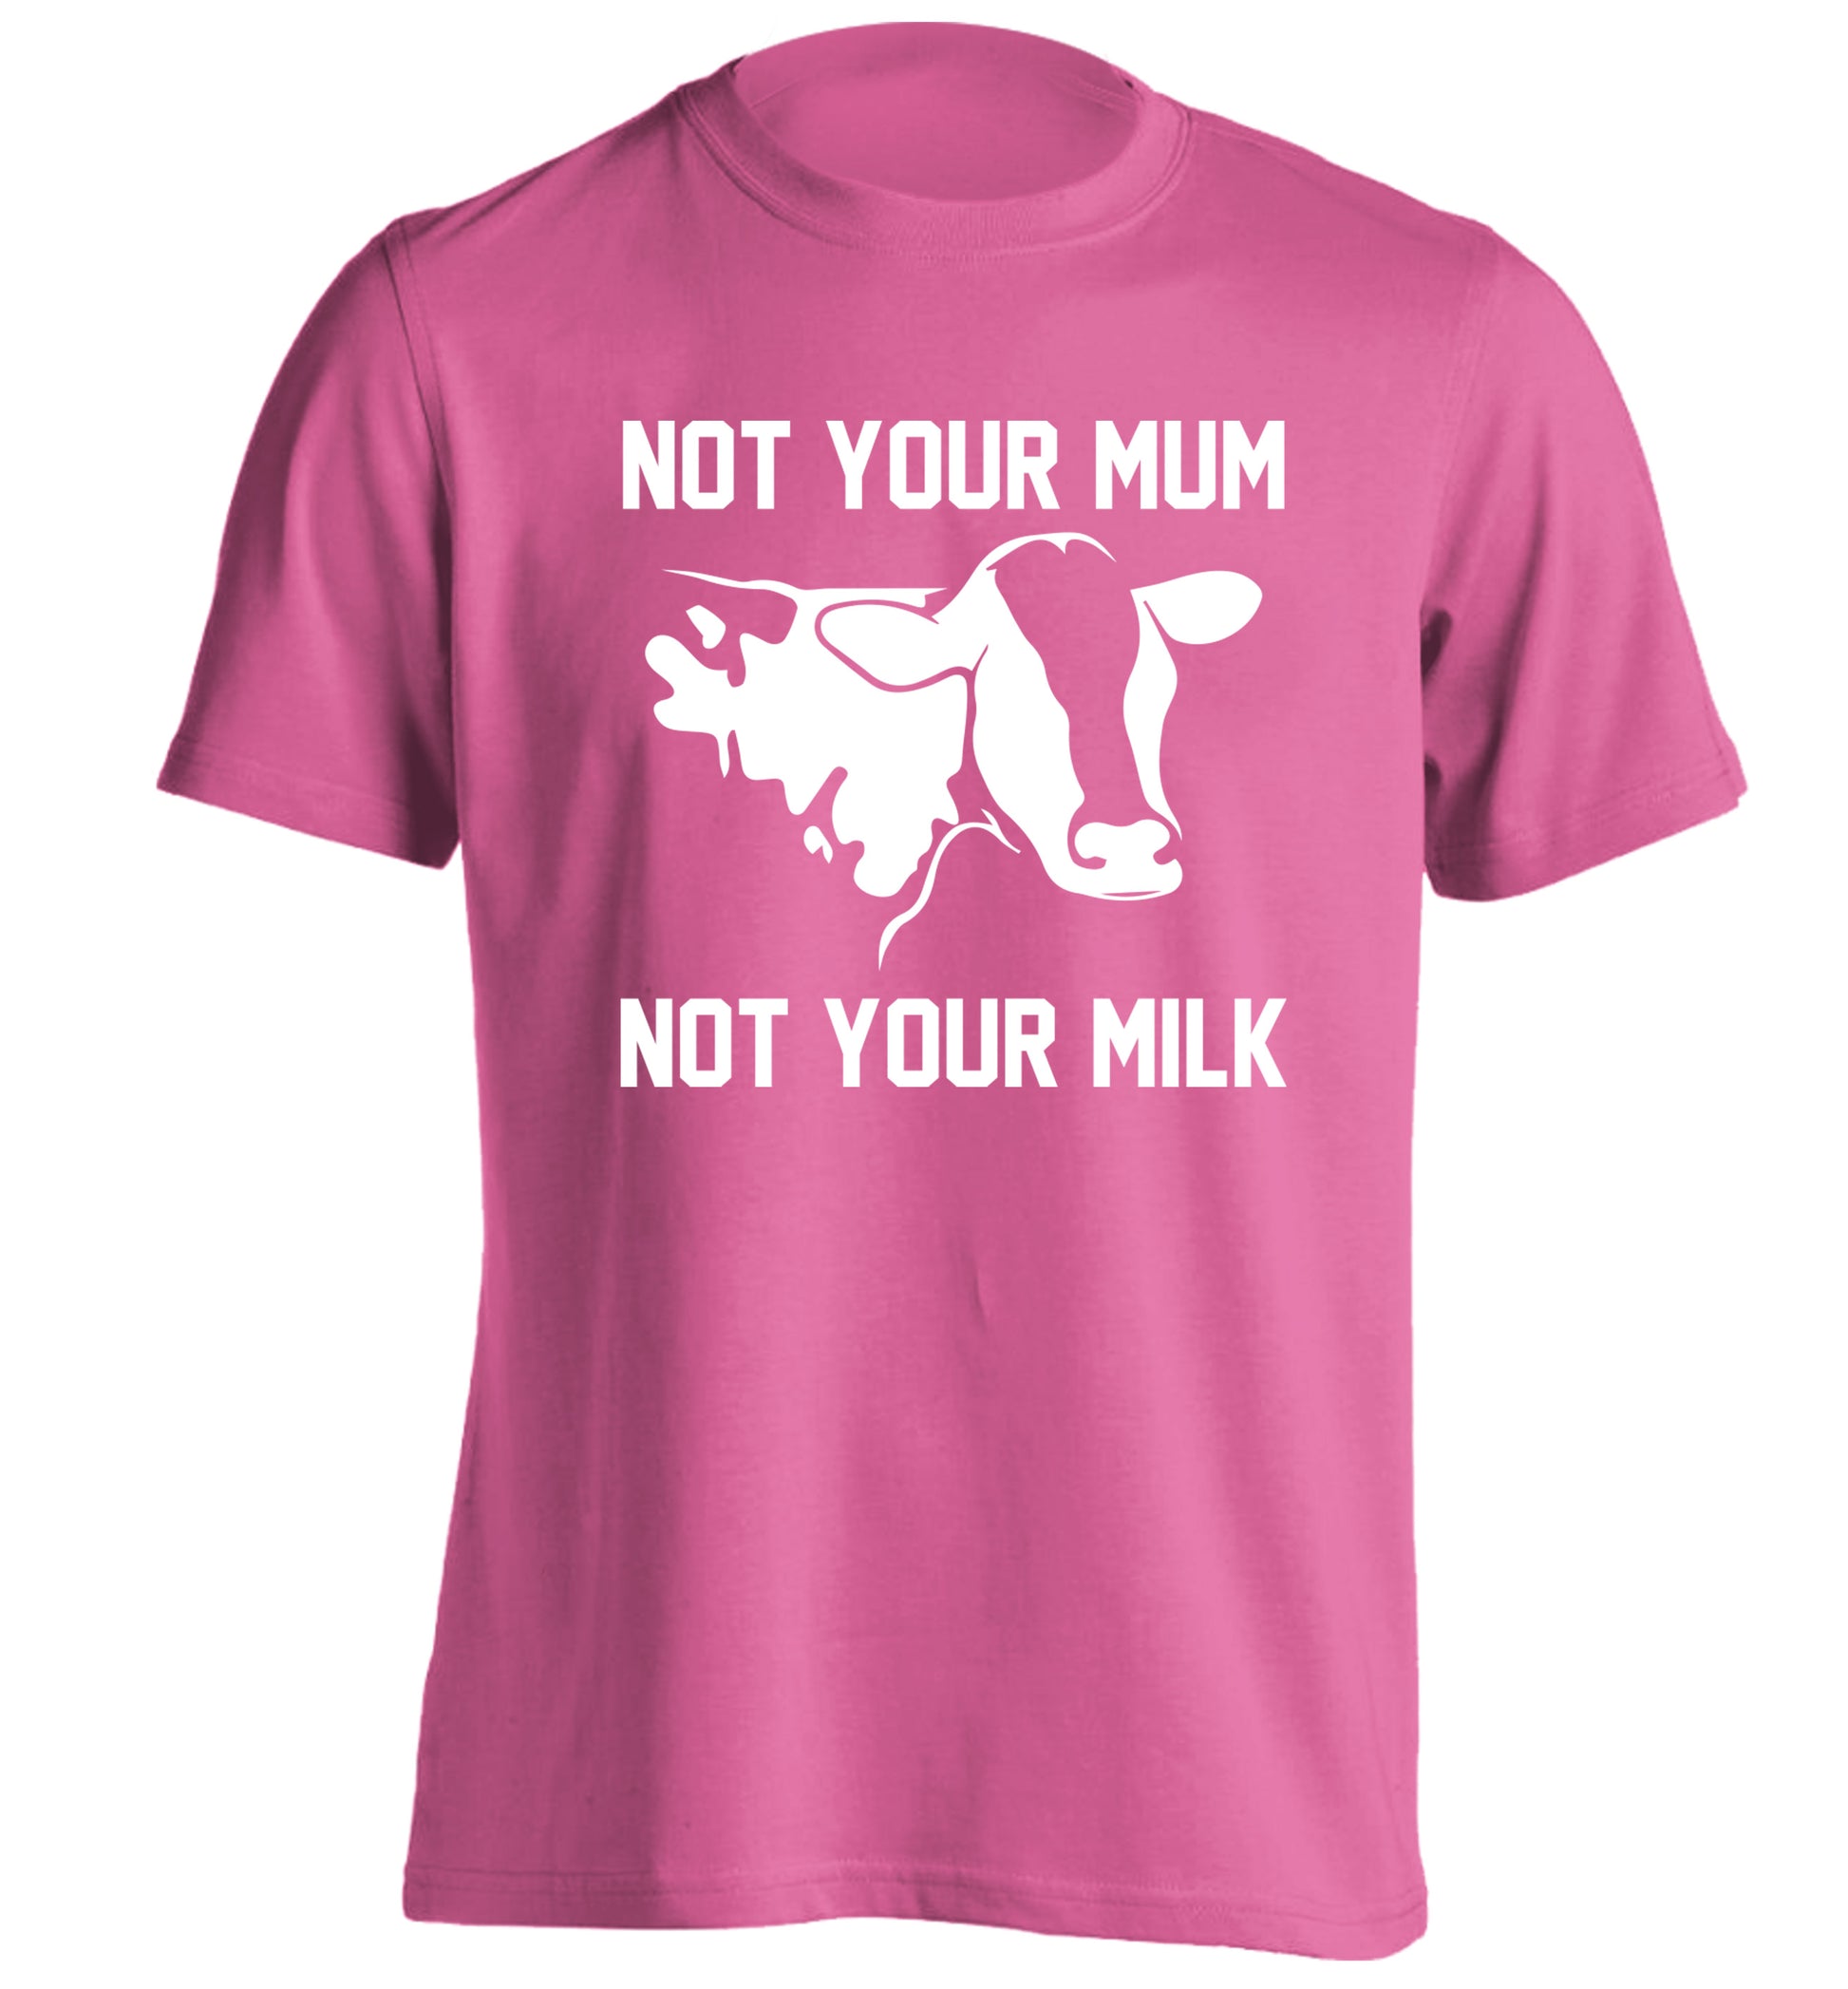 Not your mum not your milk adults unisex pink Tshirt 2XL